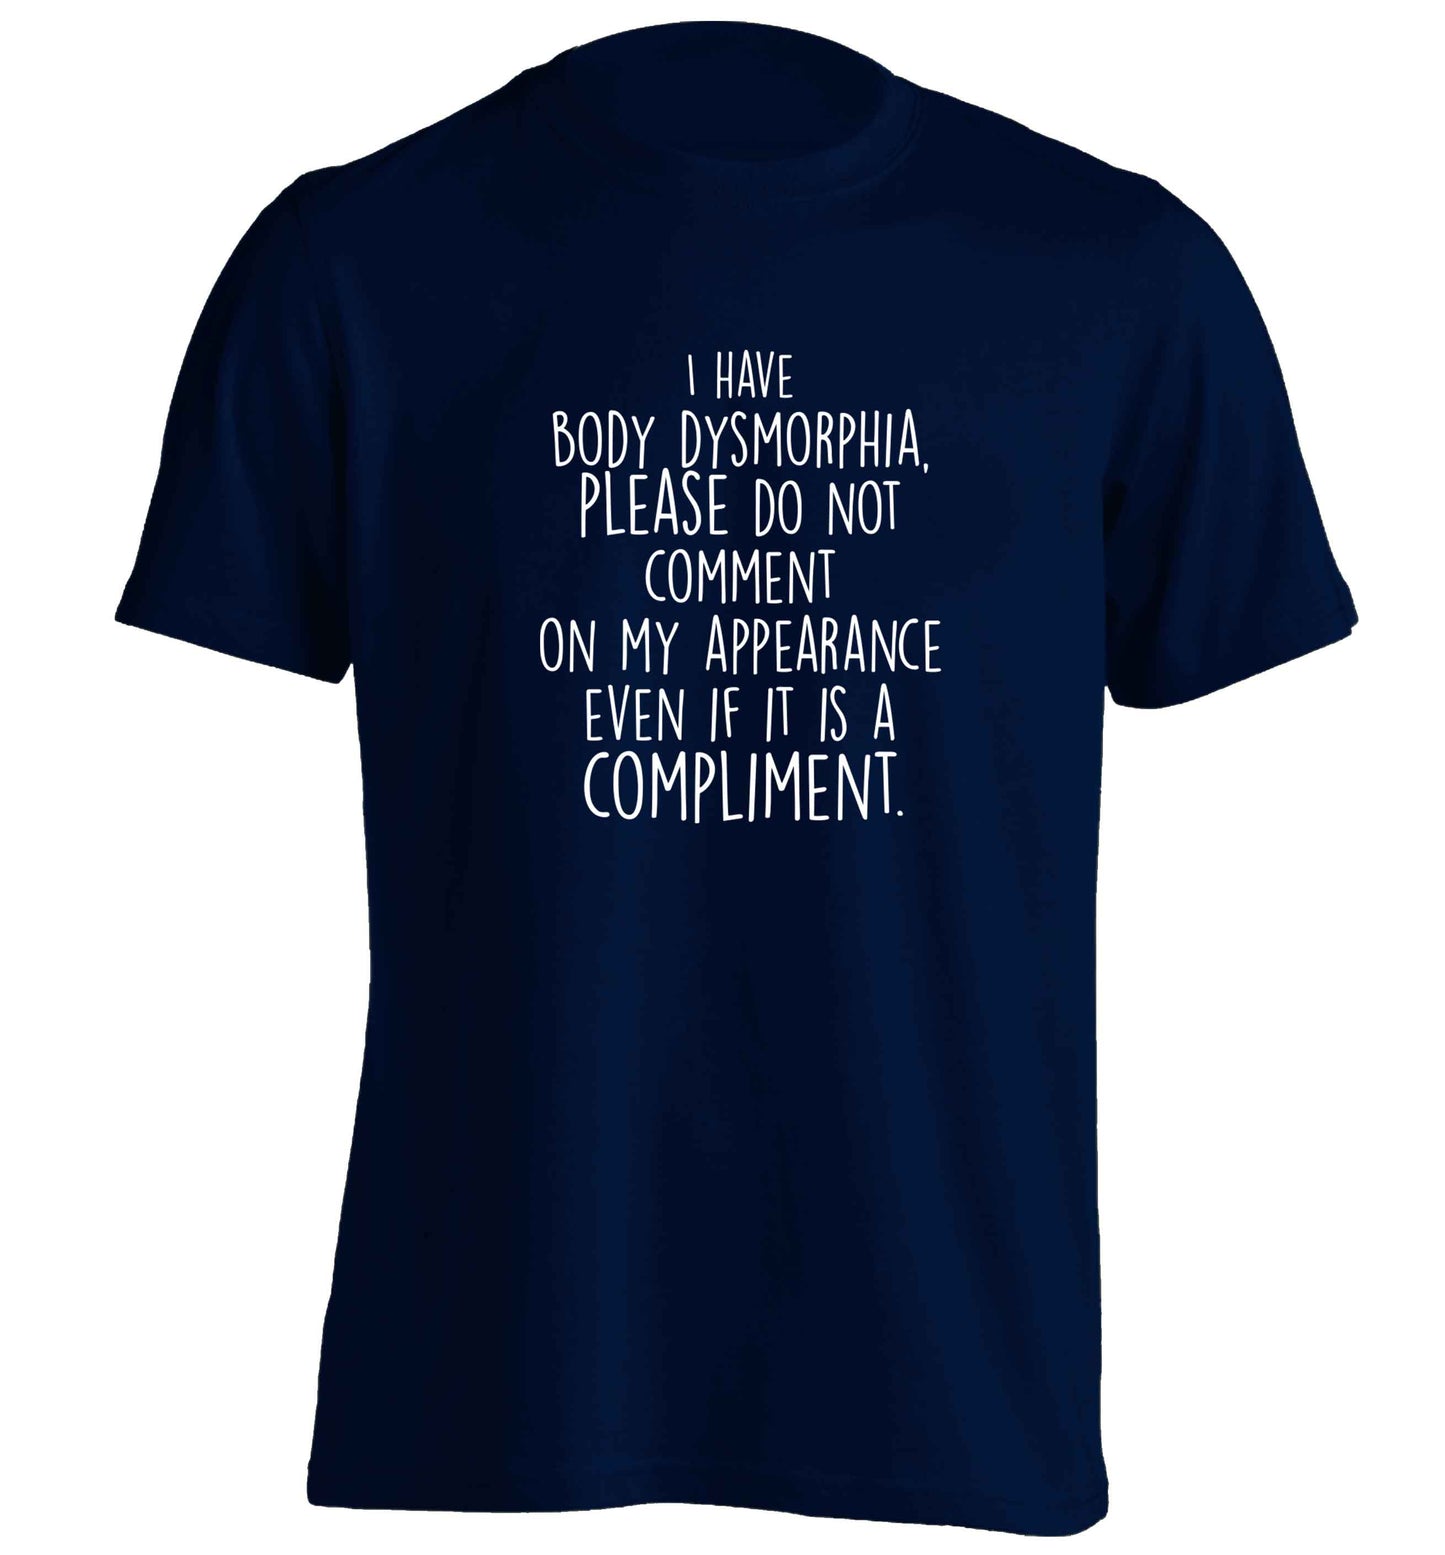 I have body dysmorphia, please do not comment on my appearance even if it is a compliment adults unisex navy Tshirt 2XL